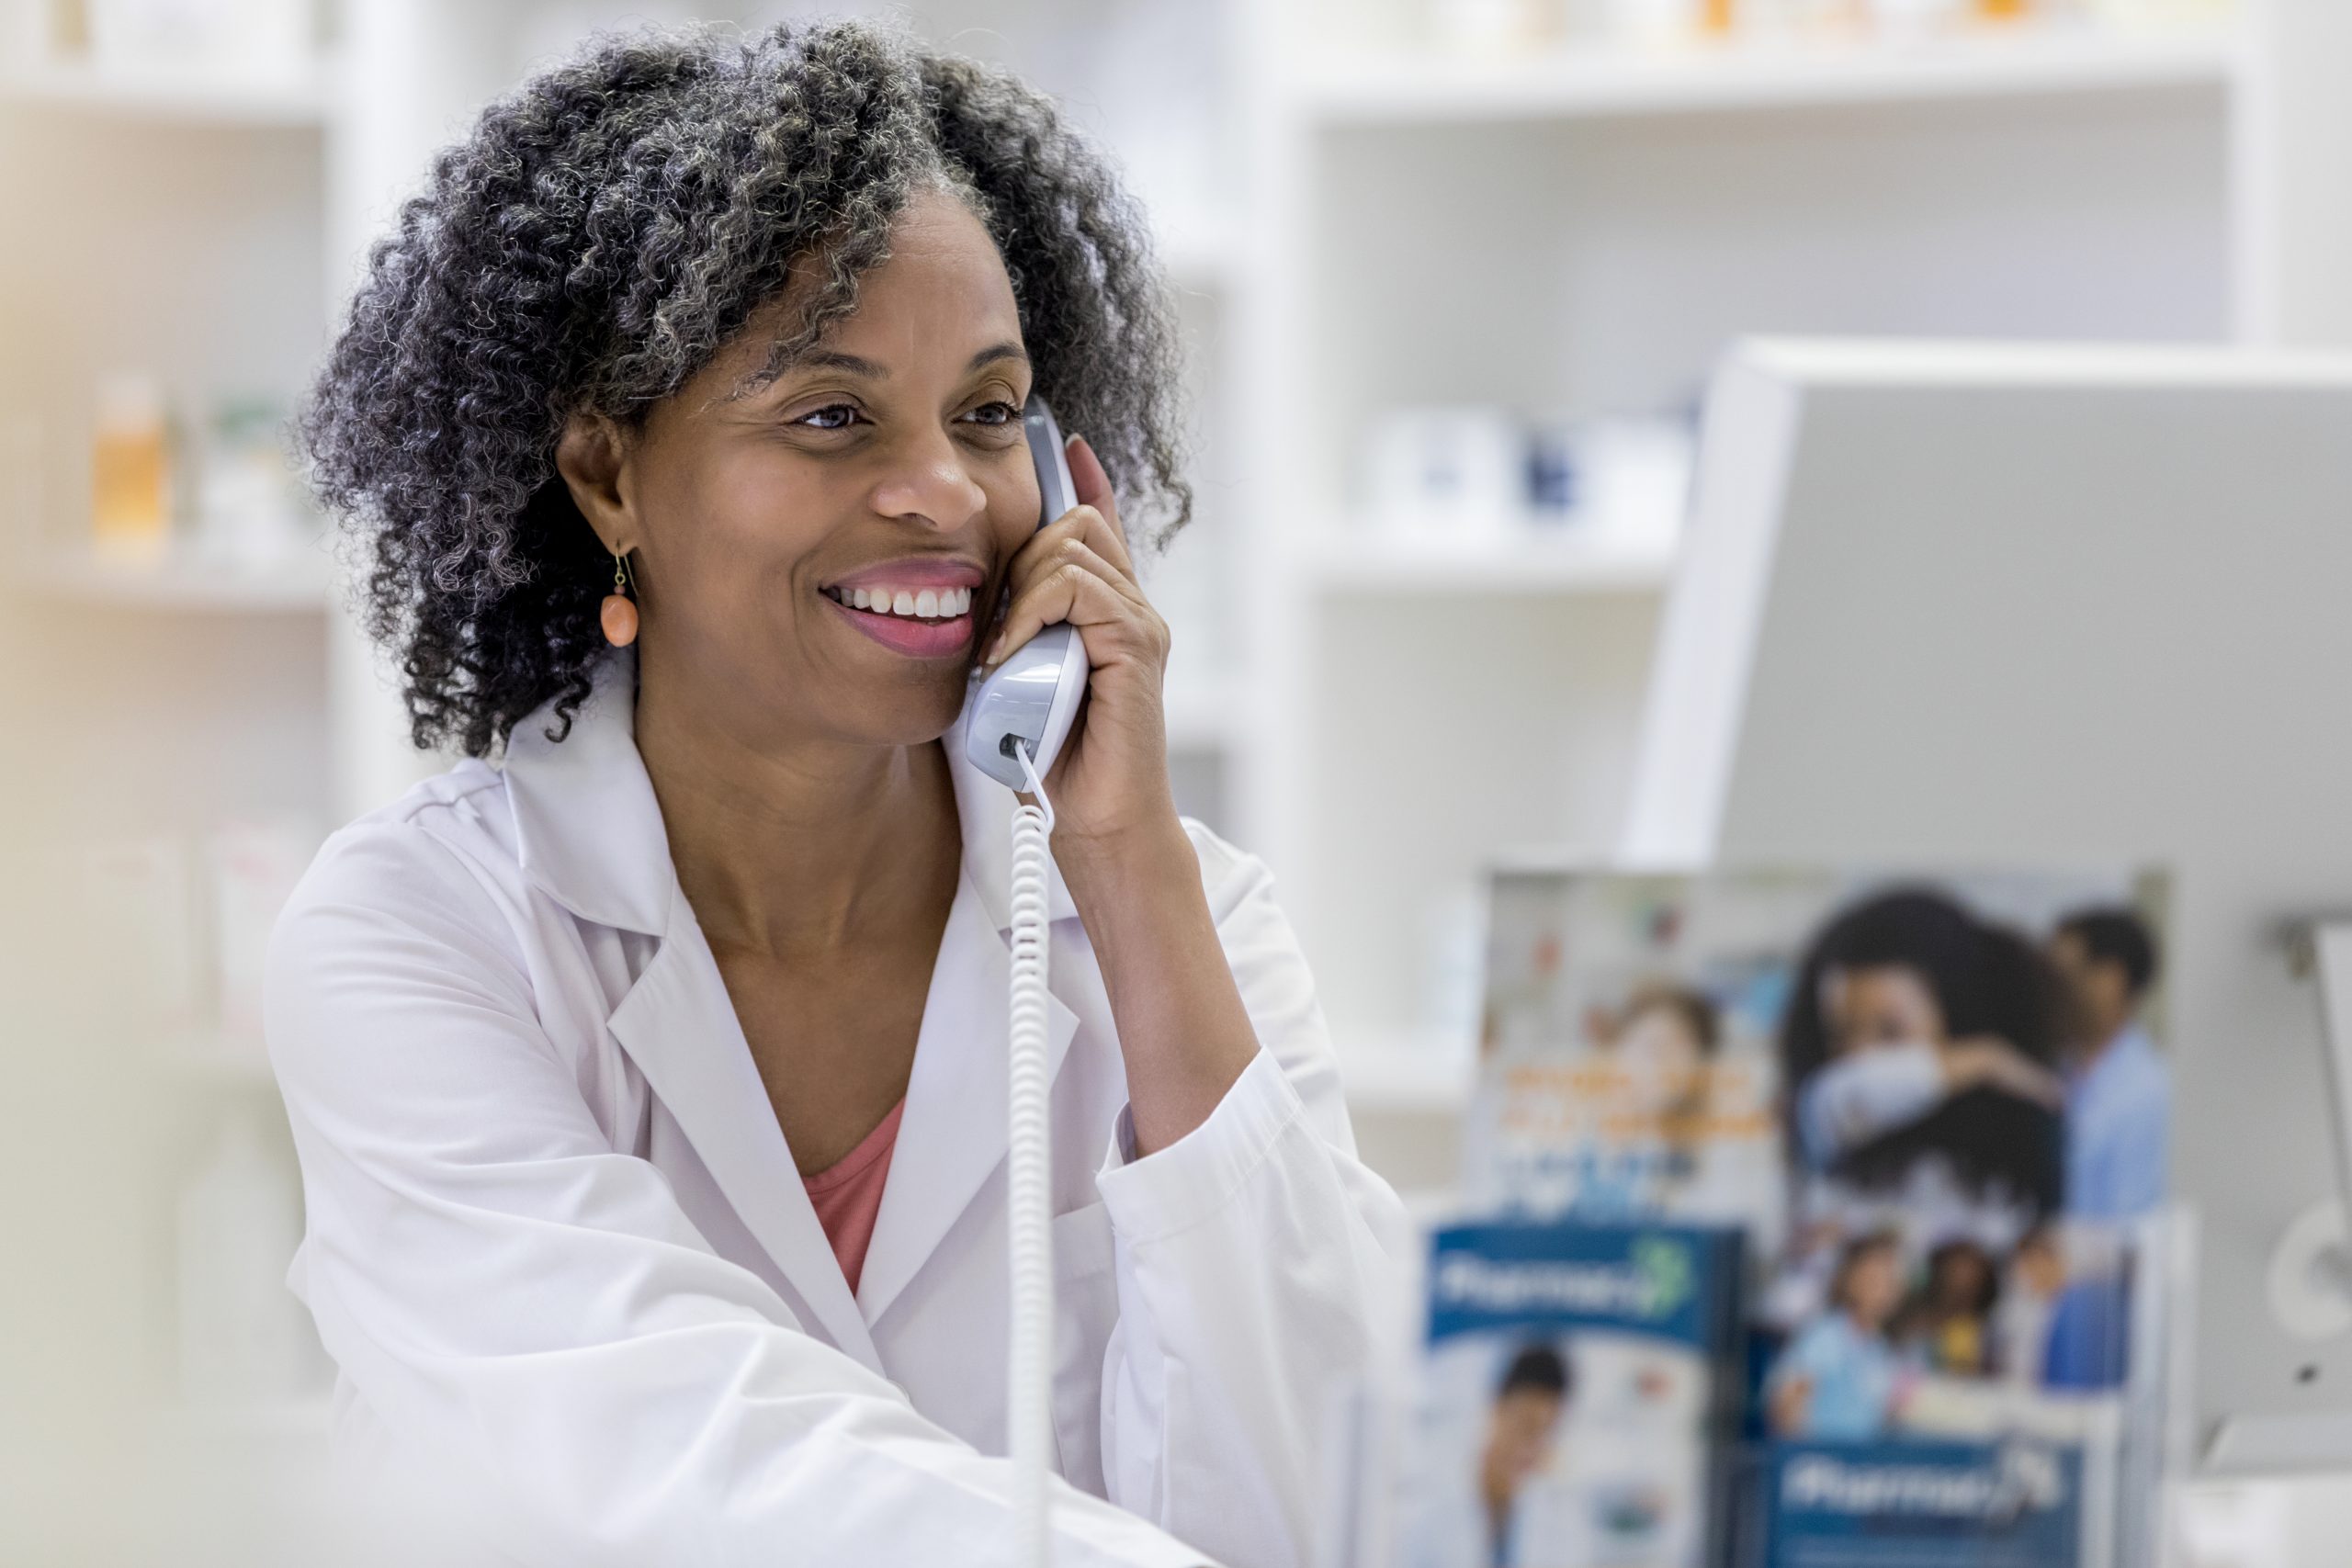 Pharmacist consults computer records for patient, refers, one call medical, medical connect, medical referral, medical referrals